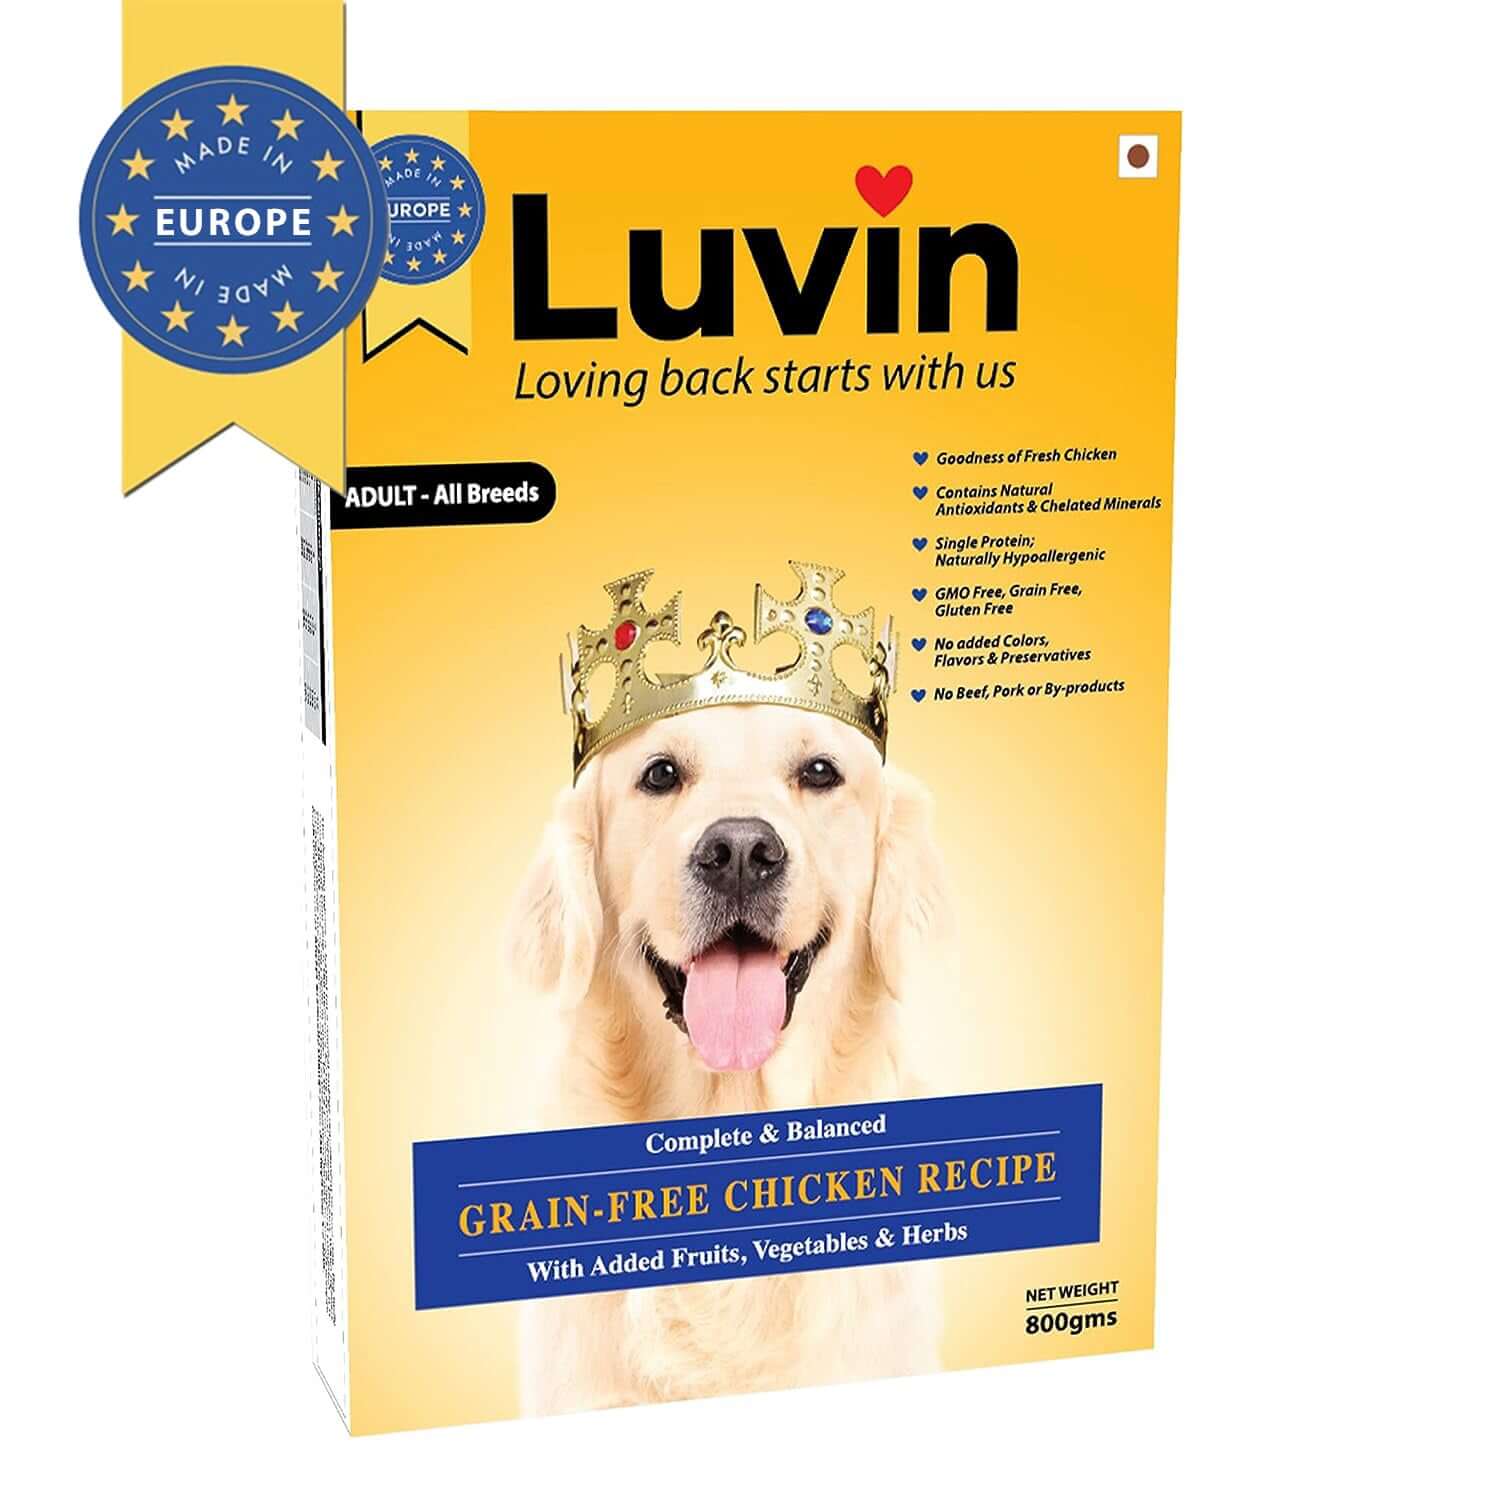 Luvin Adult Premium Dry Dog Food | Grain-Free Chicken Recipe with Antioxidants, Fruits, Vegetables & Herbs 800gm